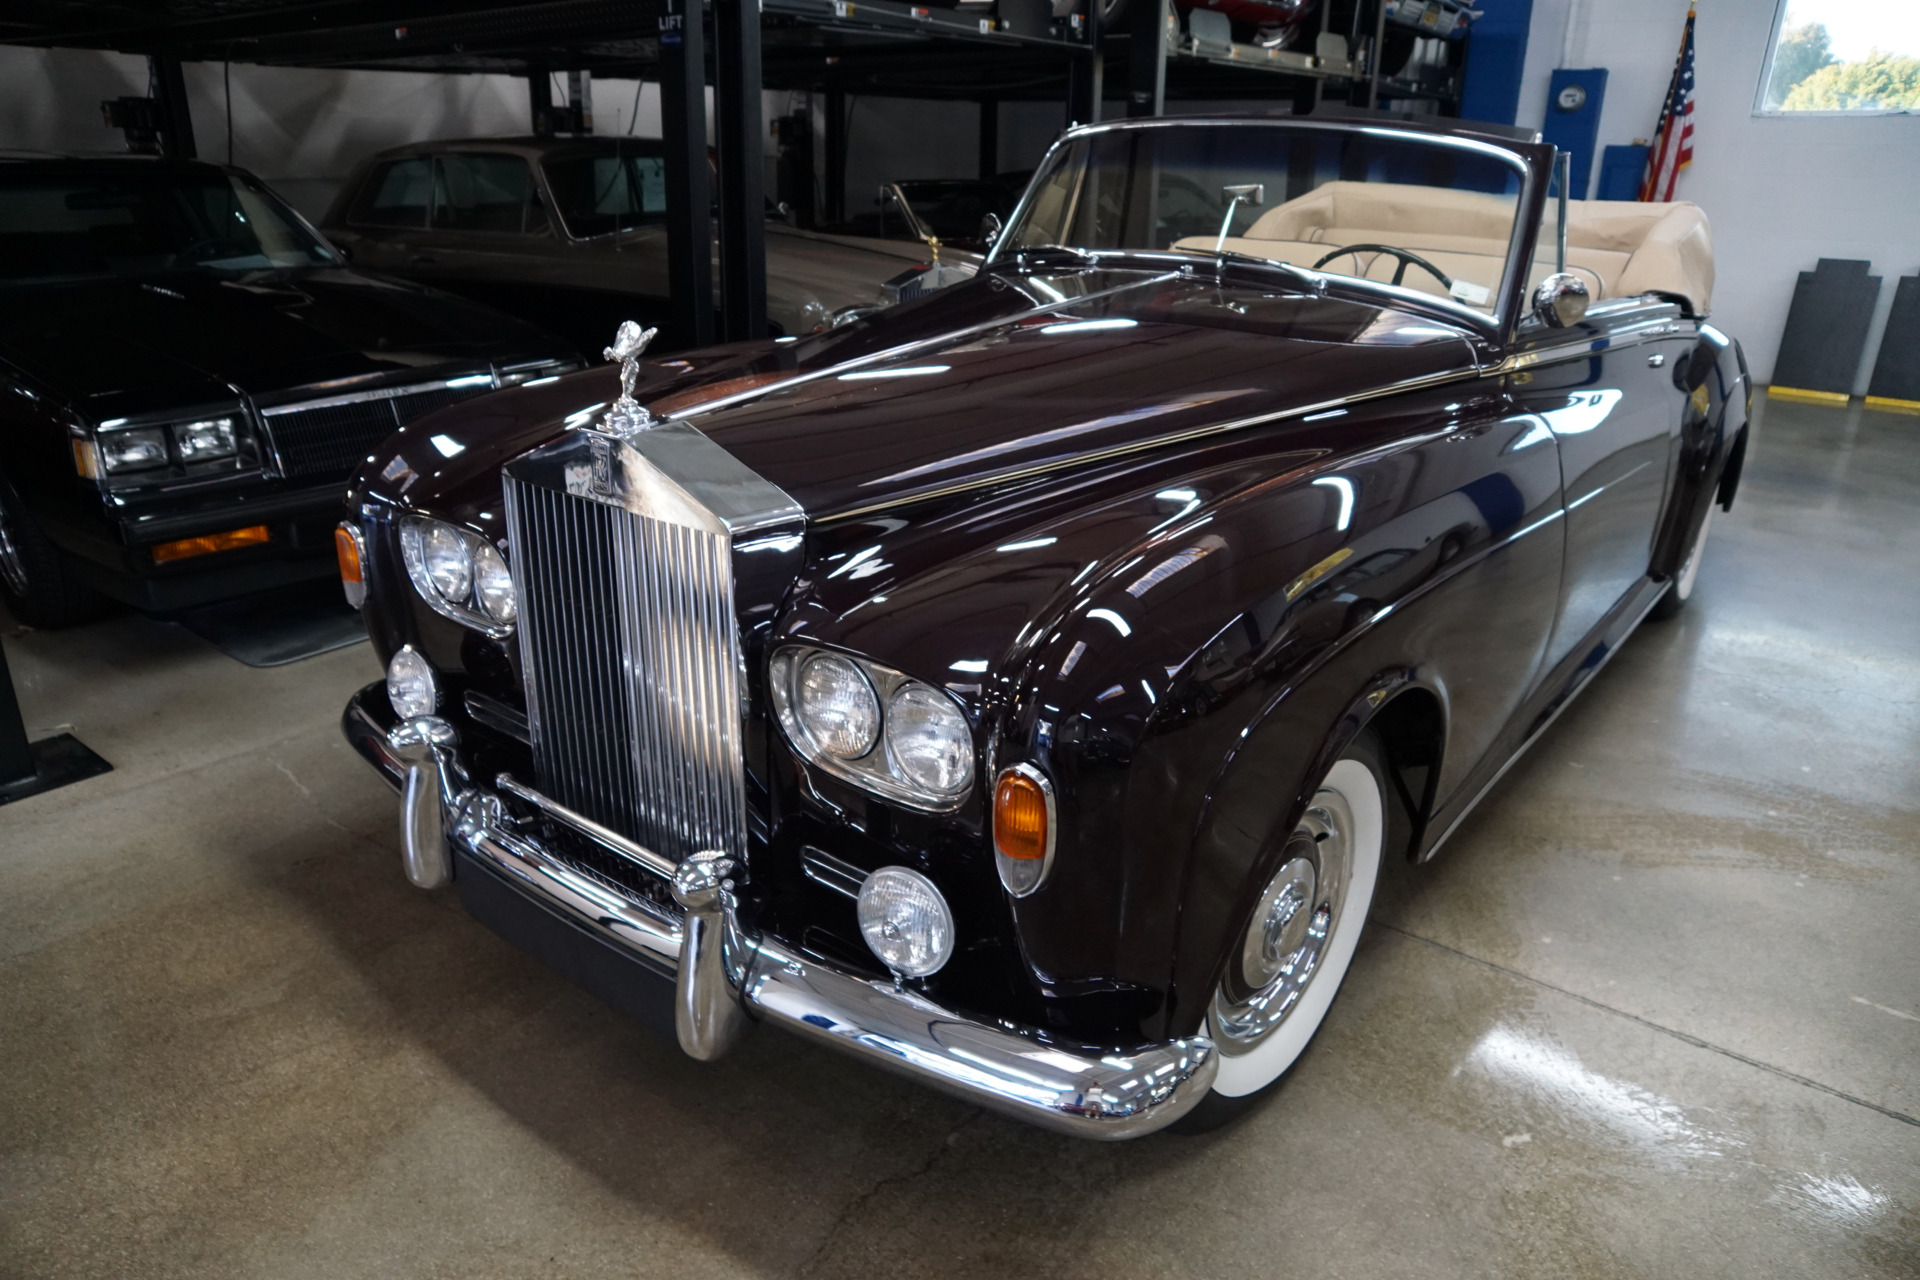 1965 RollsRoyce Silver Cloud Classic Cars for Sale  Classics on Autotrader